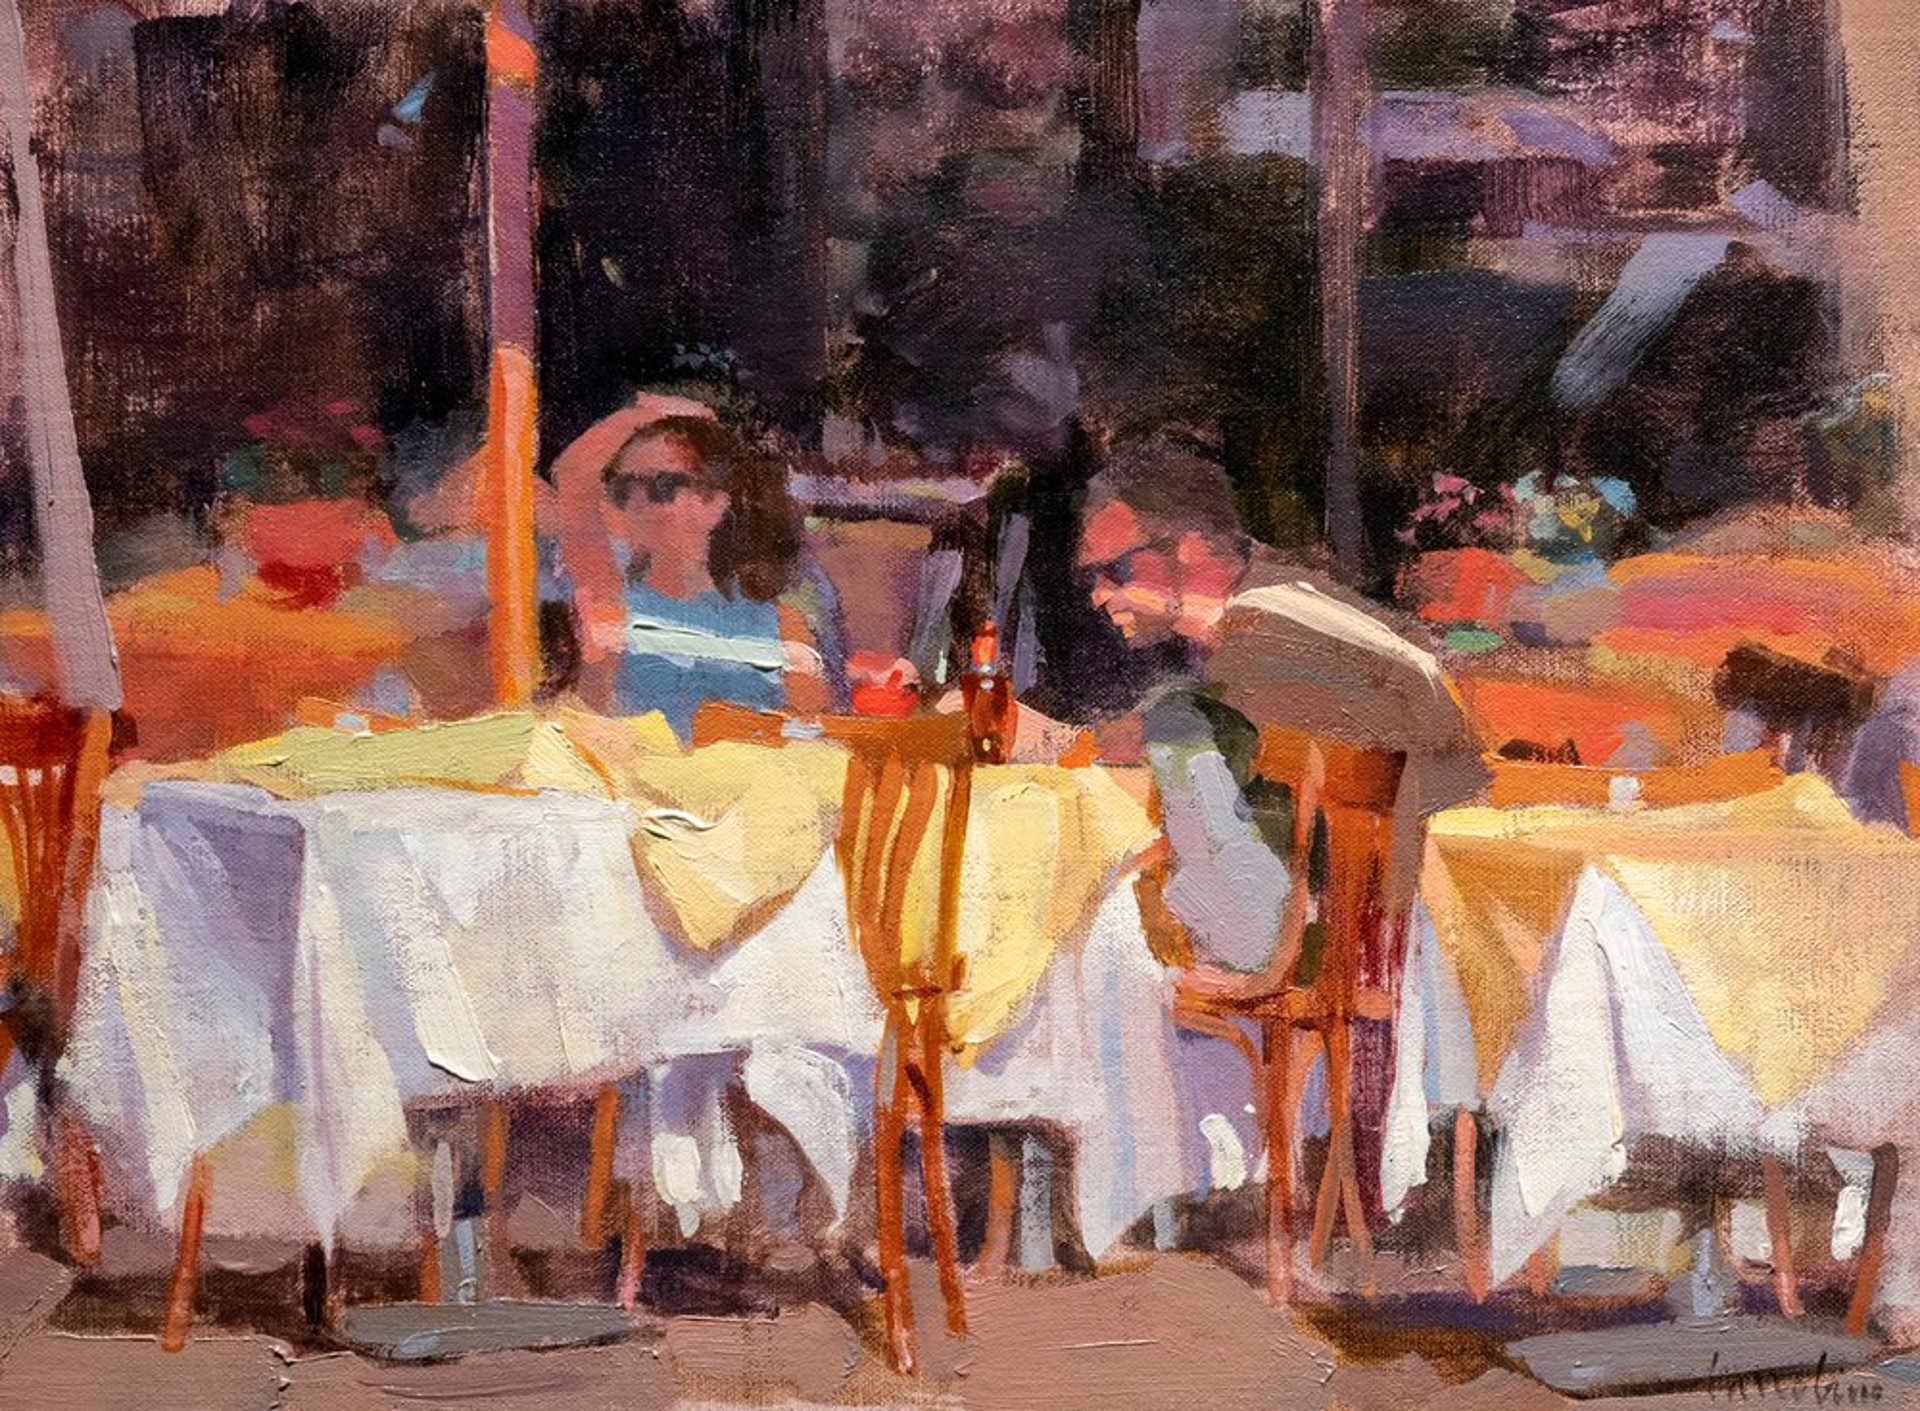 Hot Lunch in The Piazza by Charles Iarrobino